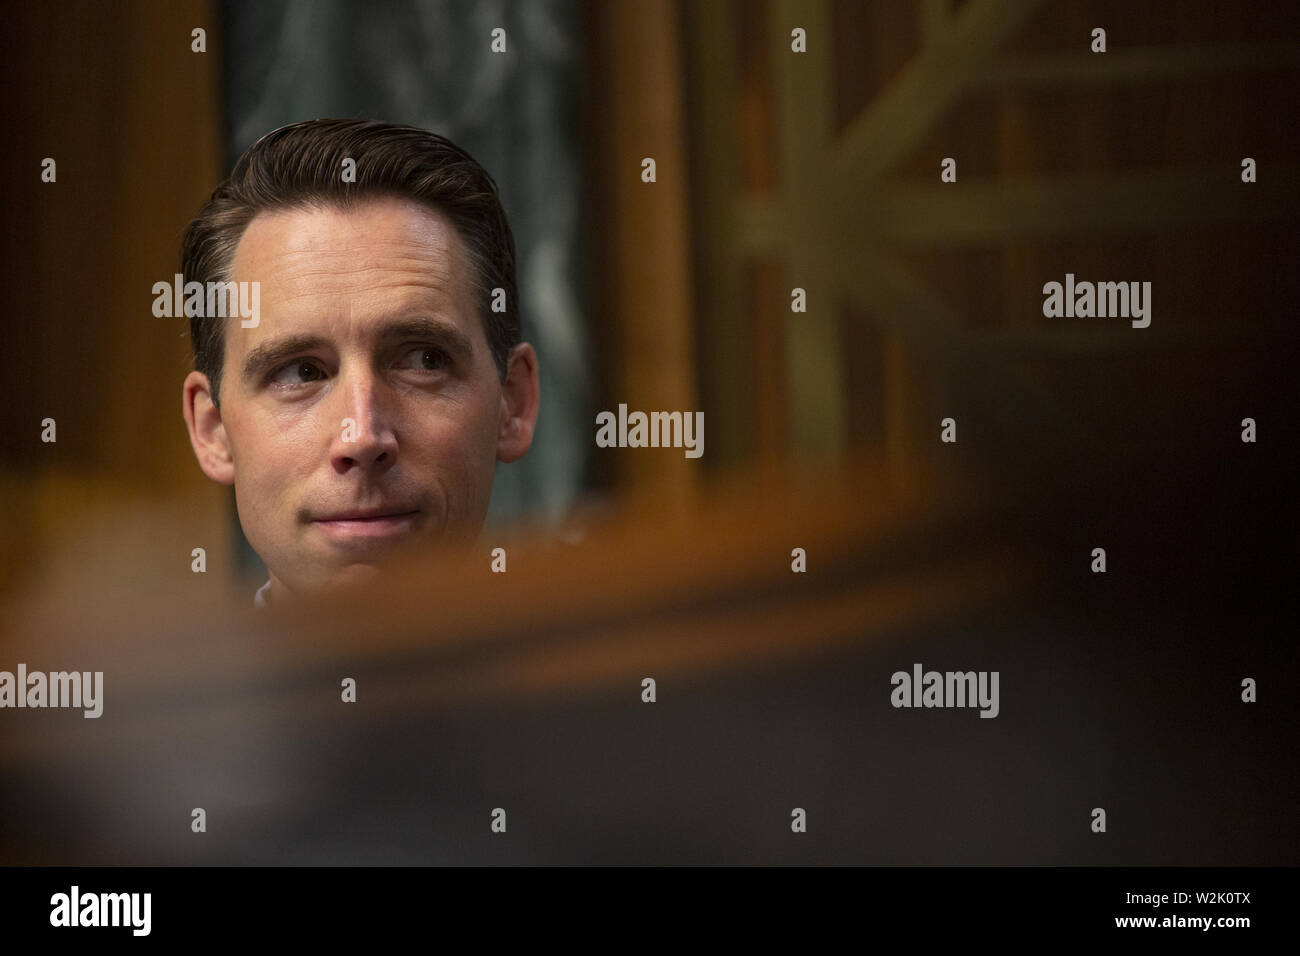 July 9, 2019 - Washington, District of Columbia, U.S. - United States Senator Josh Hawley (Republican of Missouri) listens to the testimony of Solicitor Of The Fourteenth Judicial District, South Carolina Duffie Stone, Professor Angela J. Campbell of the Communications & Technology Clinic Institute For Public Representation, Founder and CEO of Protect Young Eyes Christopher McKenna, President And Chief Executive Officer National Center for Missing and Exploited Children John F. Clark, and Founder And CEO Family Online Safety Institute Stephen Balkam during the Senate Judiciary Committee hearin Stock Photo